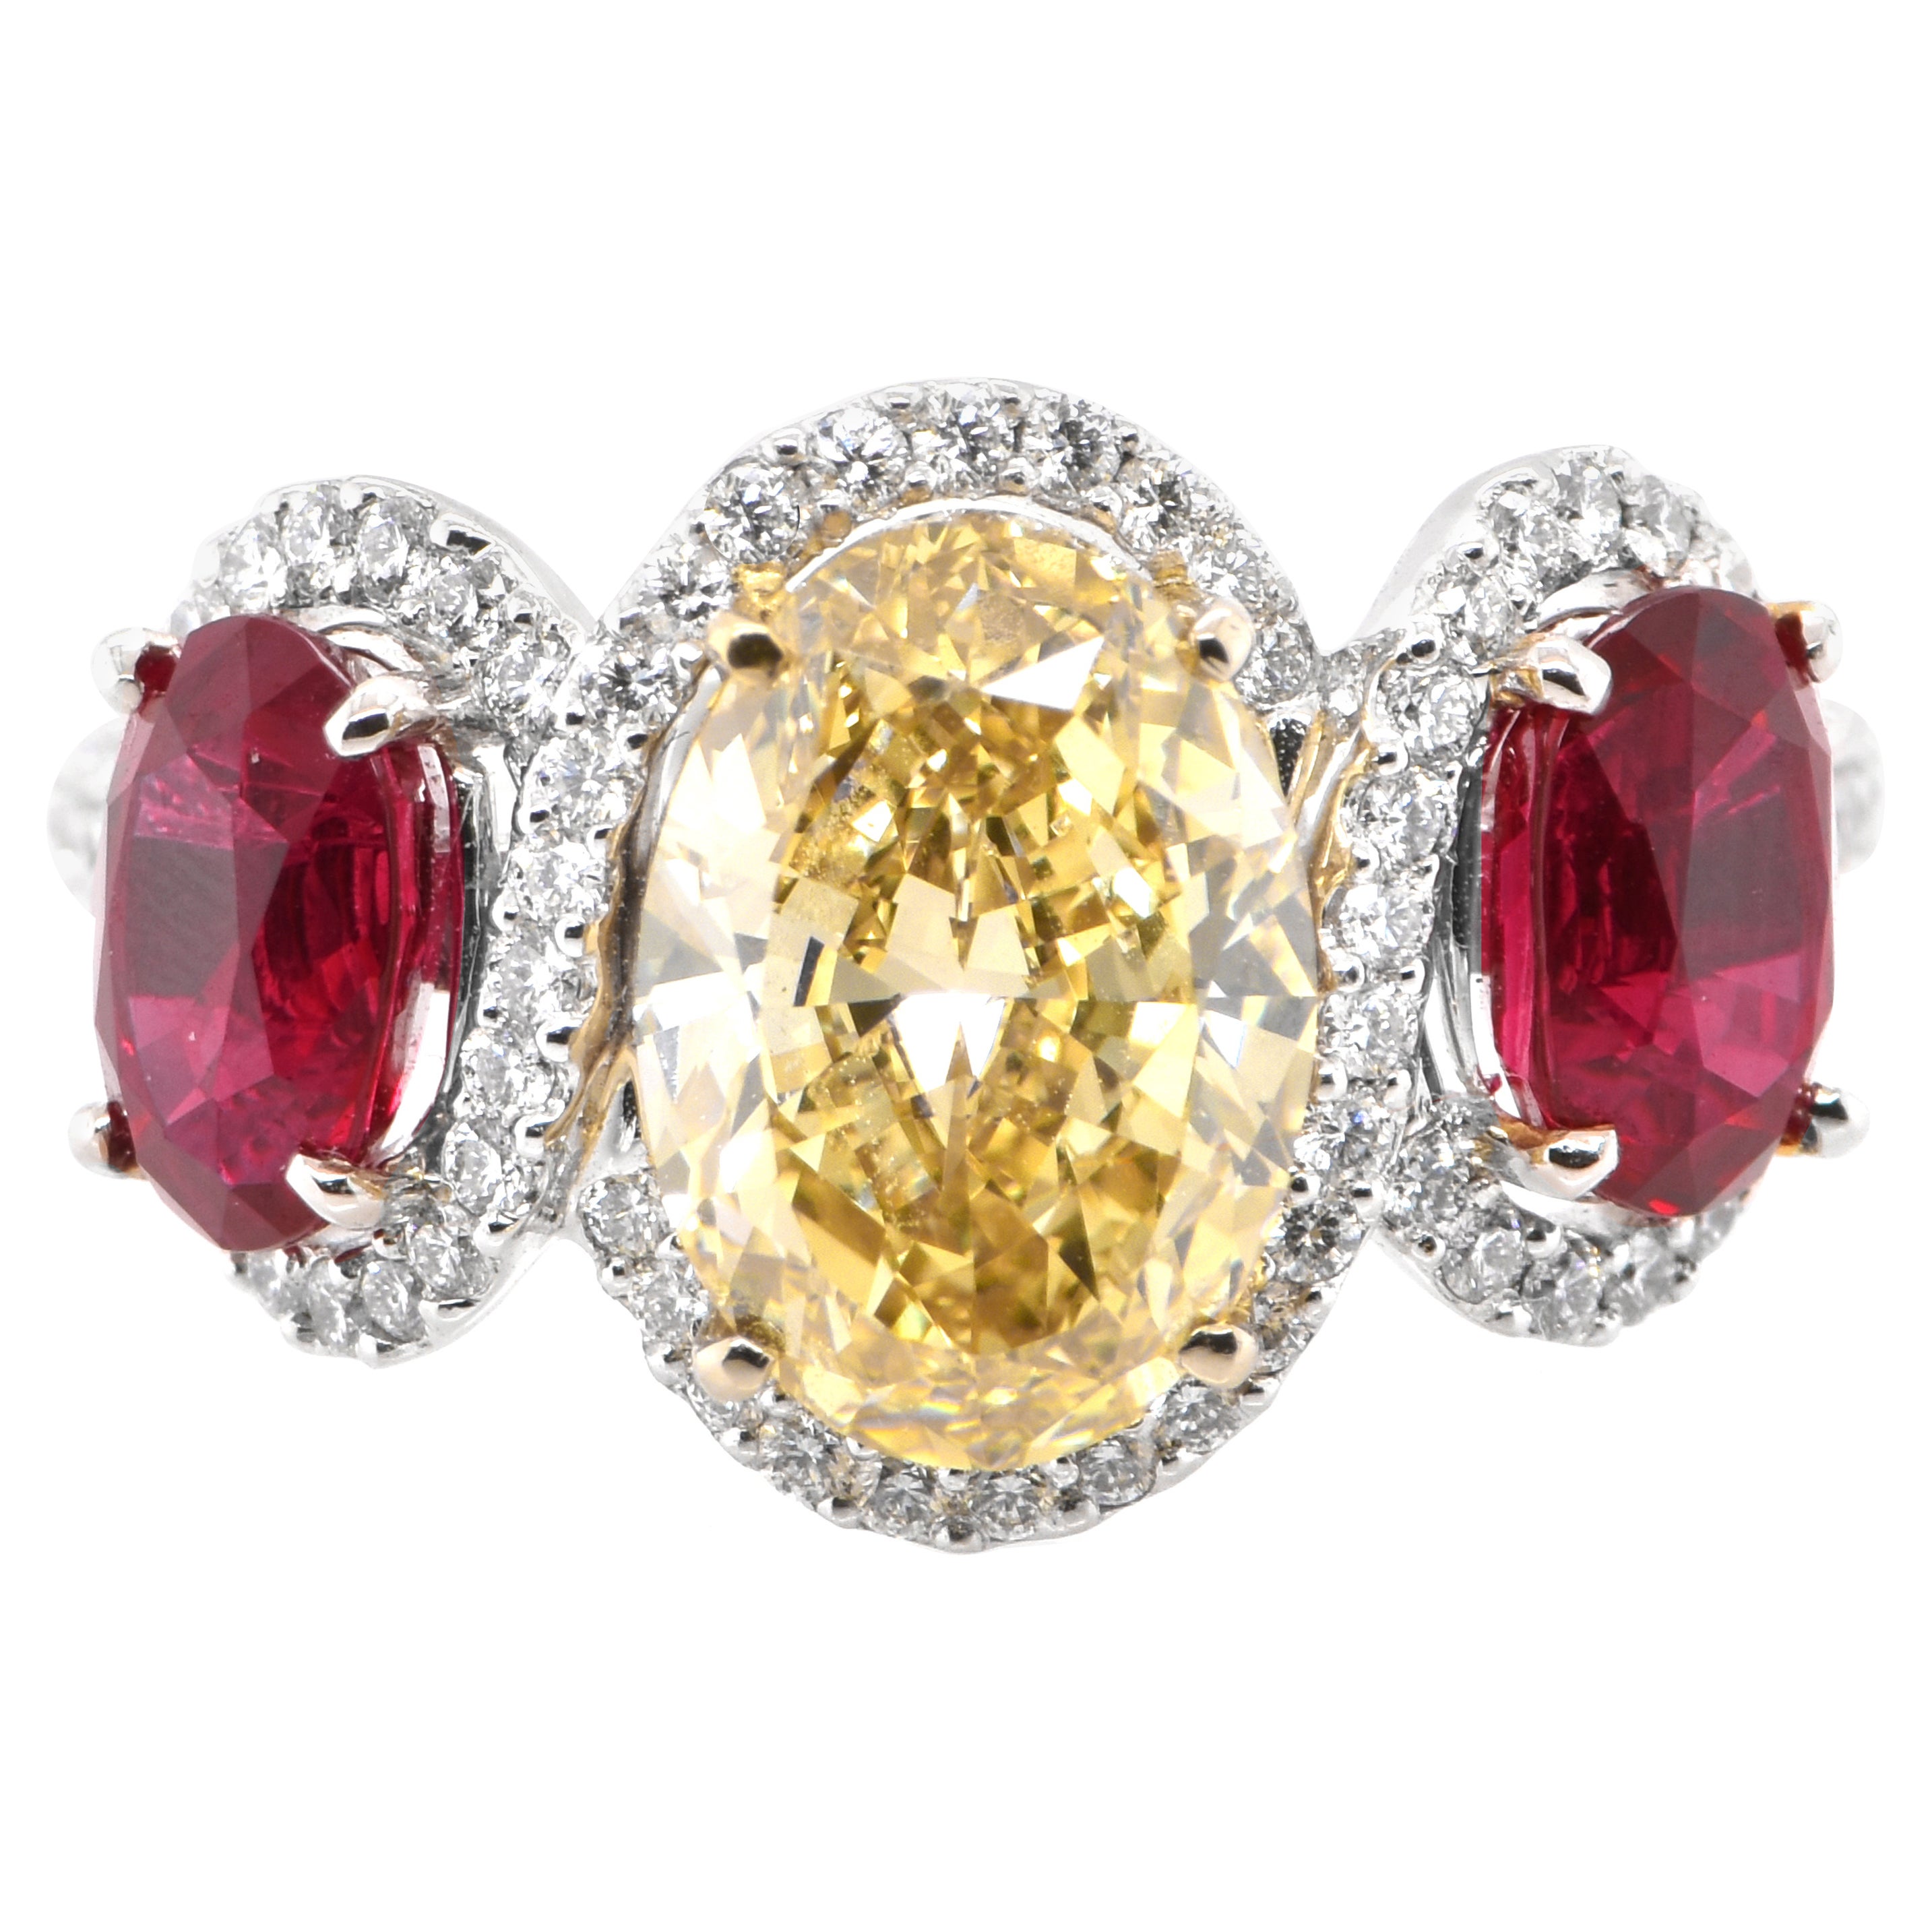 2.41 Carat Natural Fancy Brownish Yellow Diamond and Ruby Ring Set in Platinum